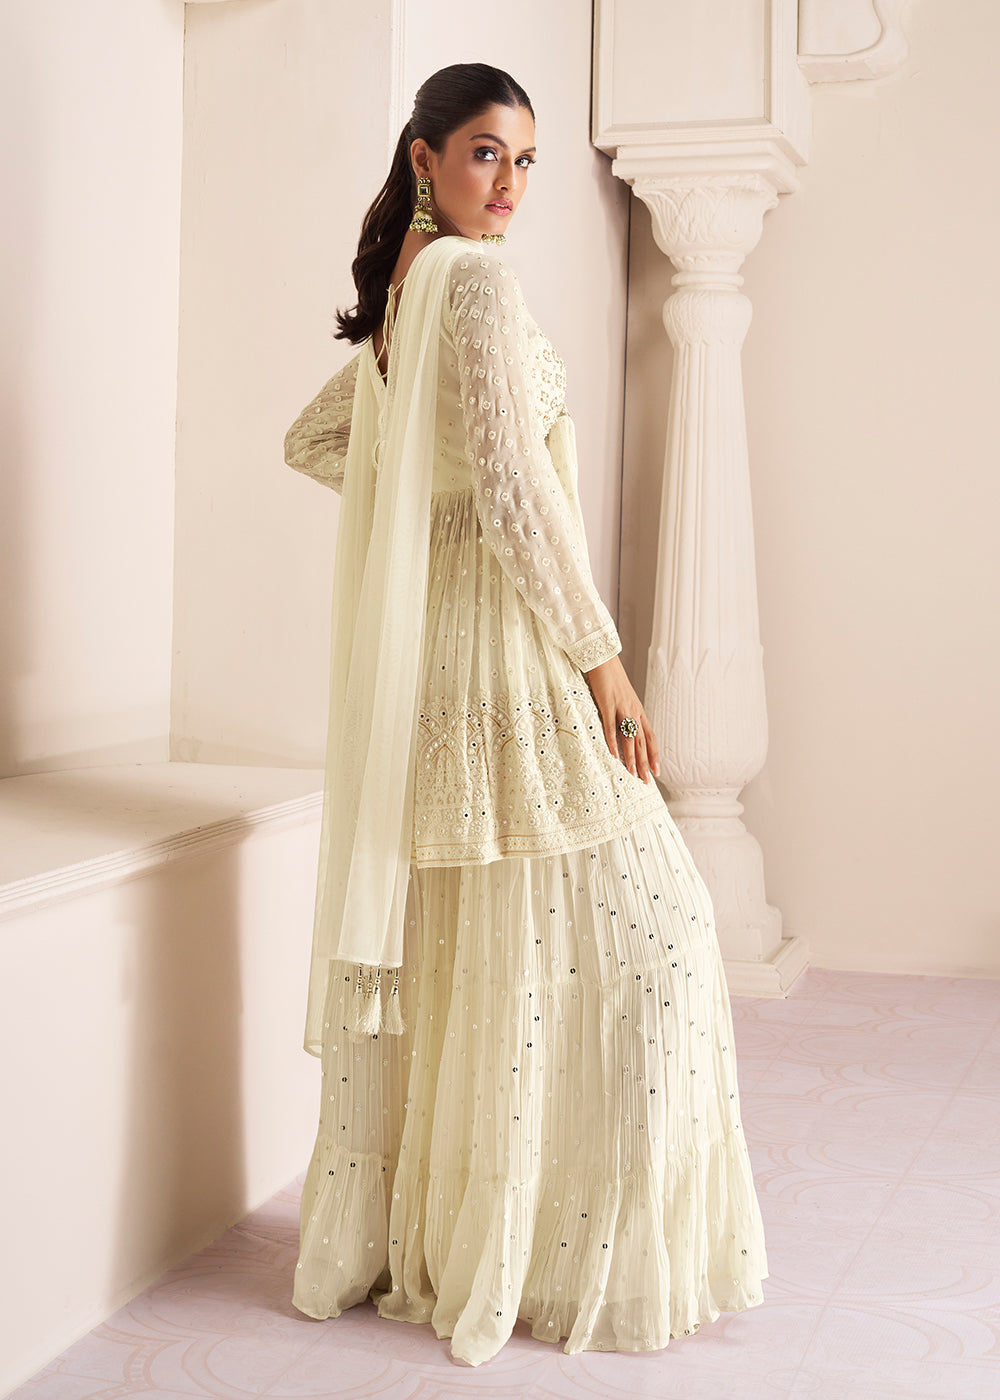 Shop Now Party Ivory Cream Embroidered Peplum Style Sharara Suit Online at Empress Clothing in USA, UK, Canada, Italy & Worldwide.